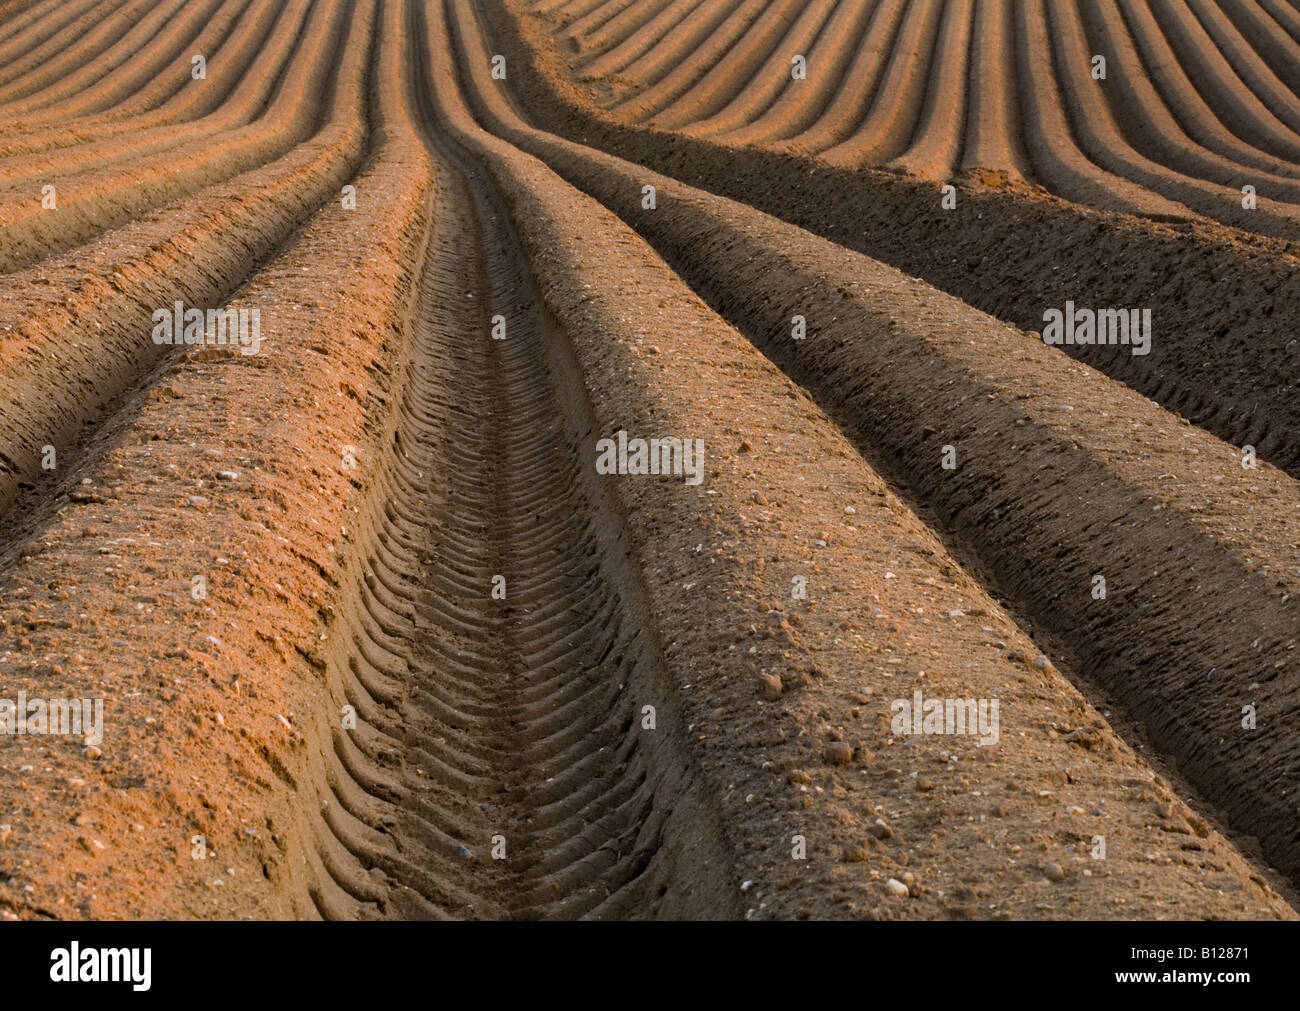 Patterns of rows of potato baulks in a field Stock Photo